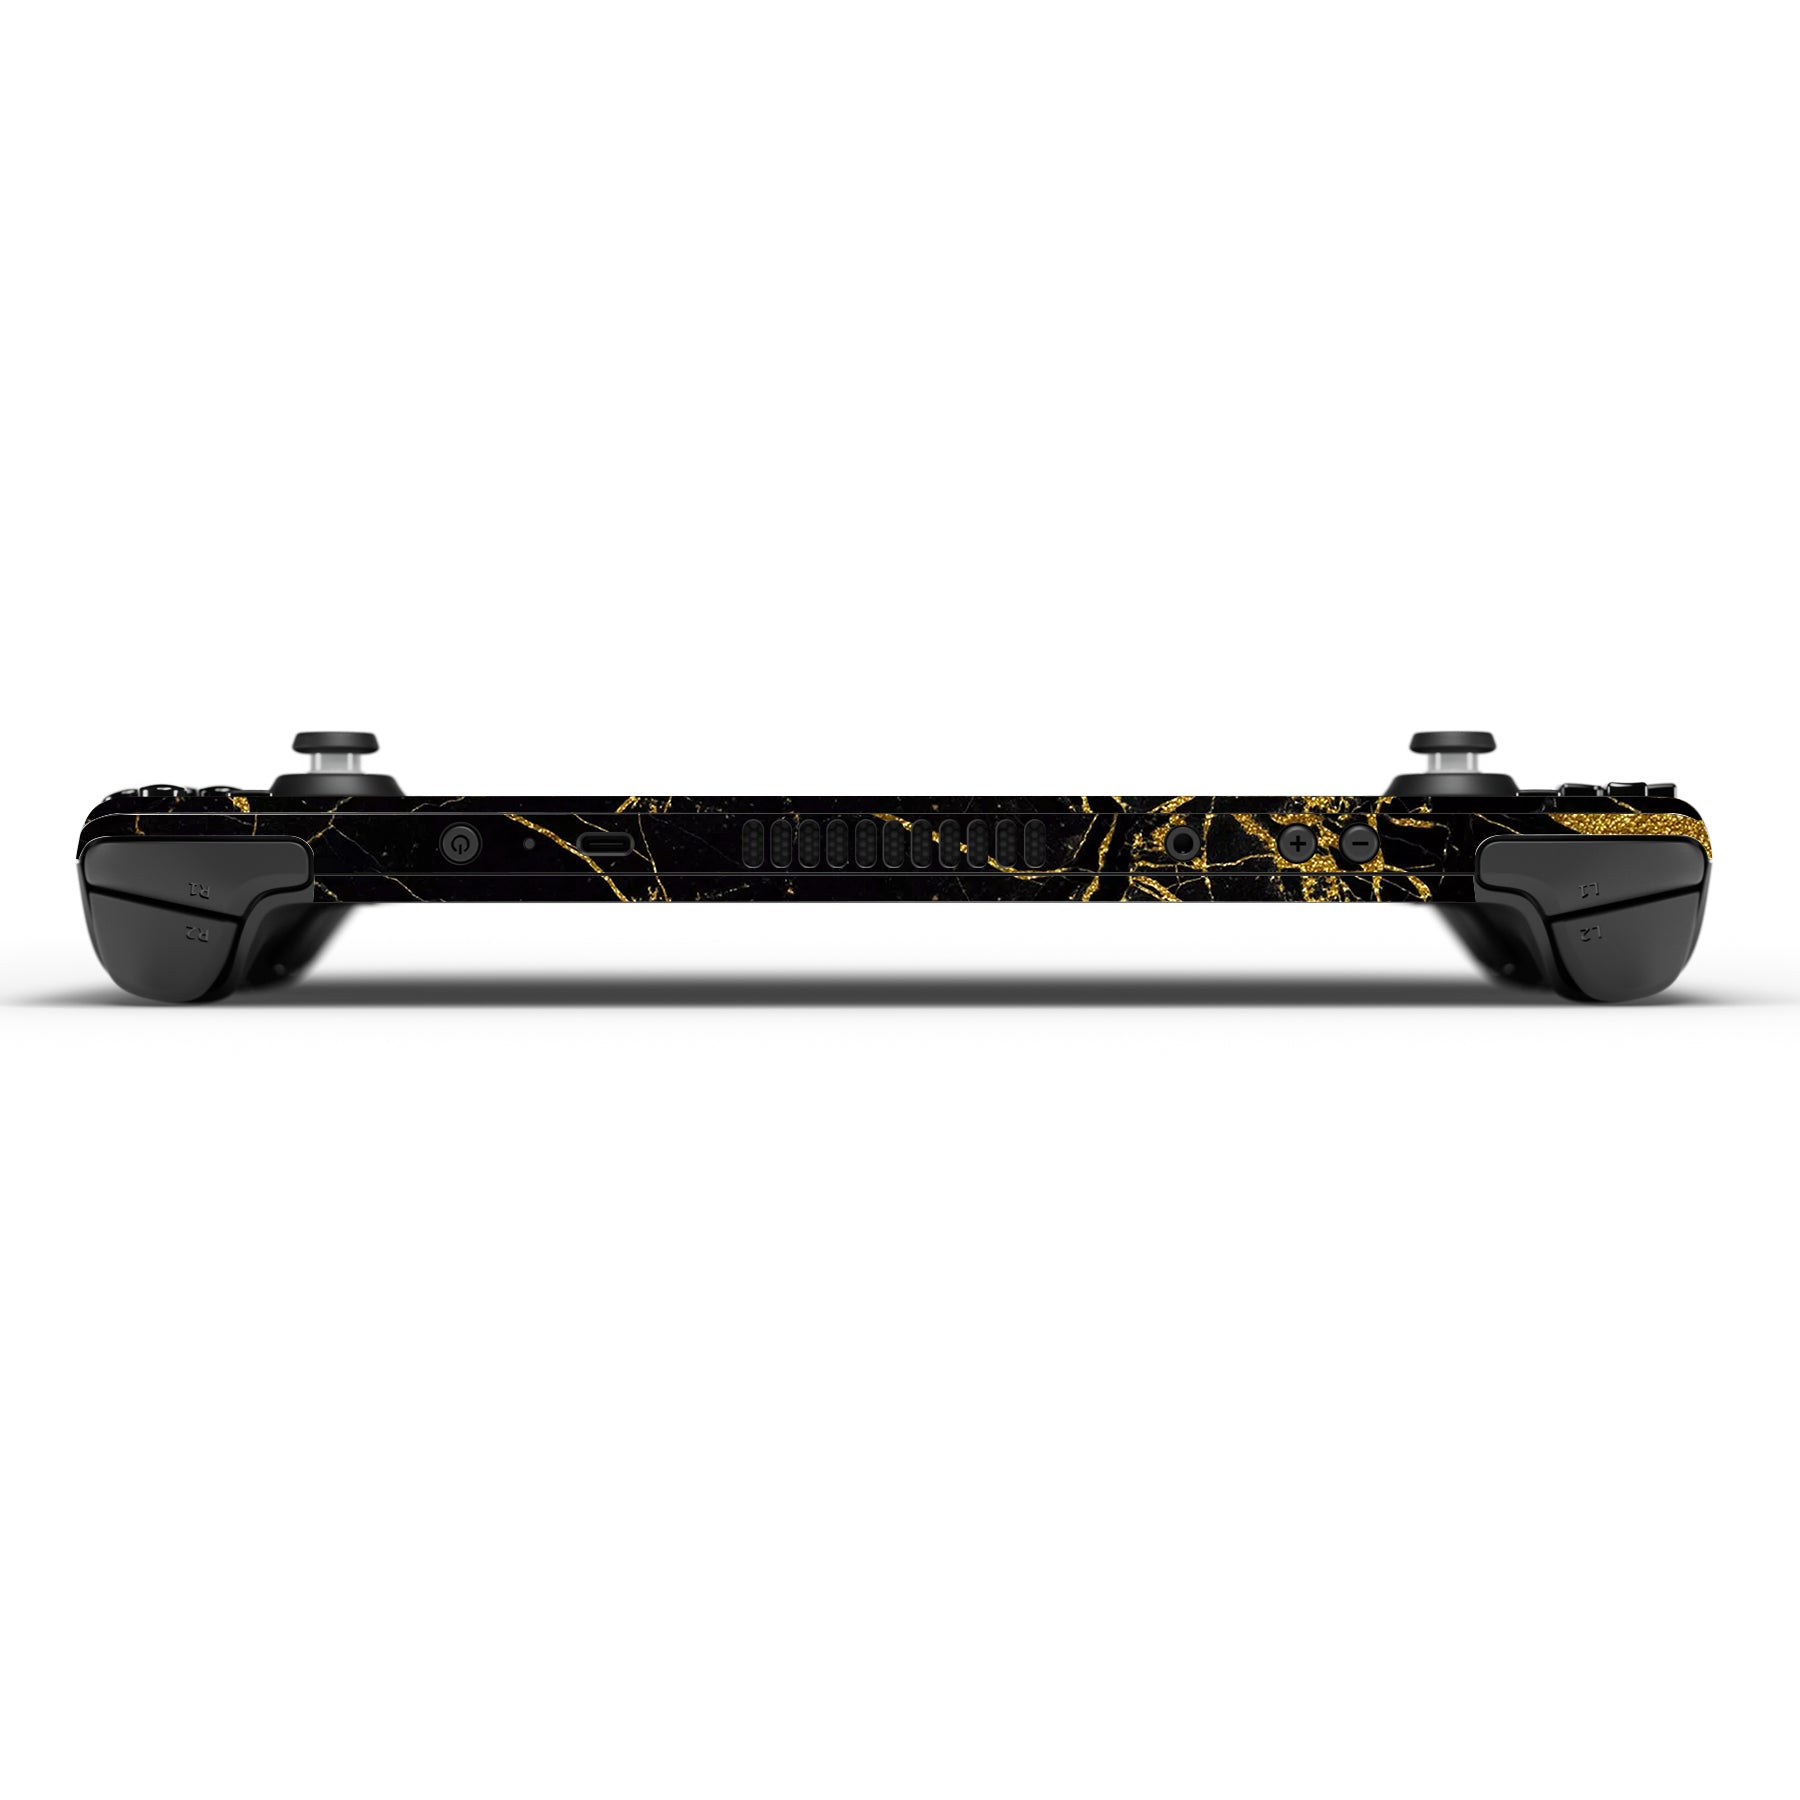 PlayVital Black & Gold Marble Effect Full Set Skin Decal for ps5 Console  Digital Edition, Sticker Vi…See more PlayVital Black & Gold Marble Effect